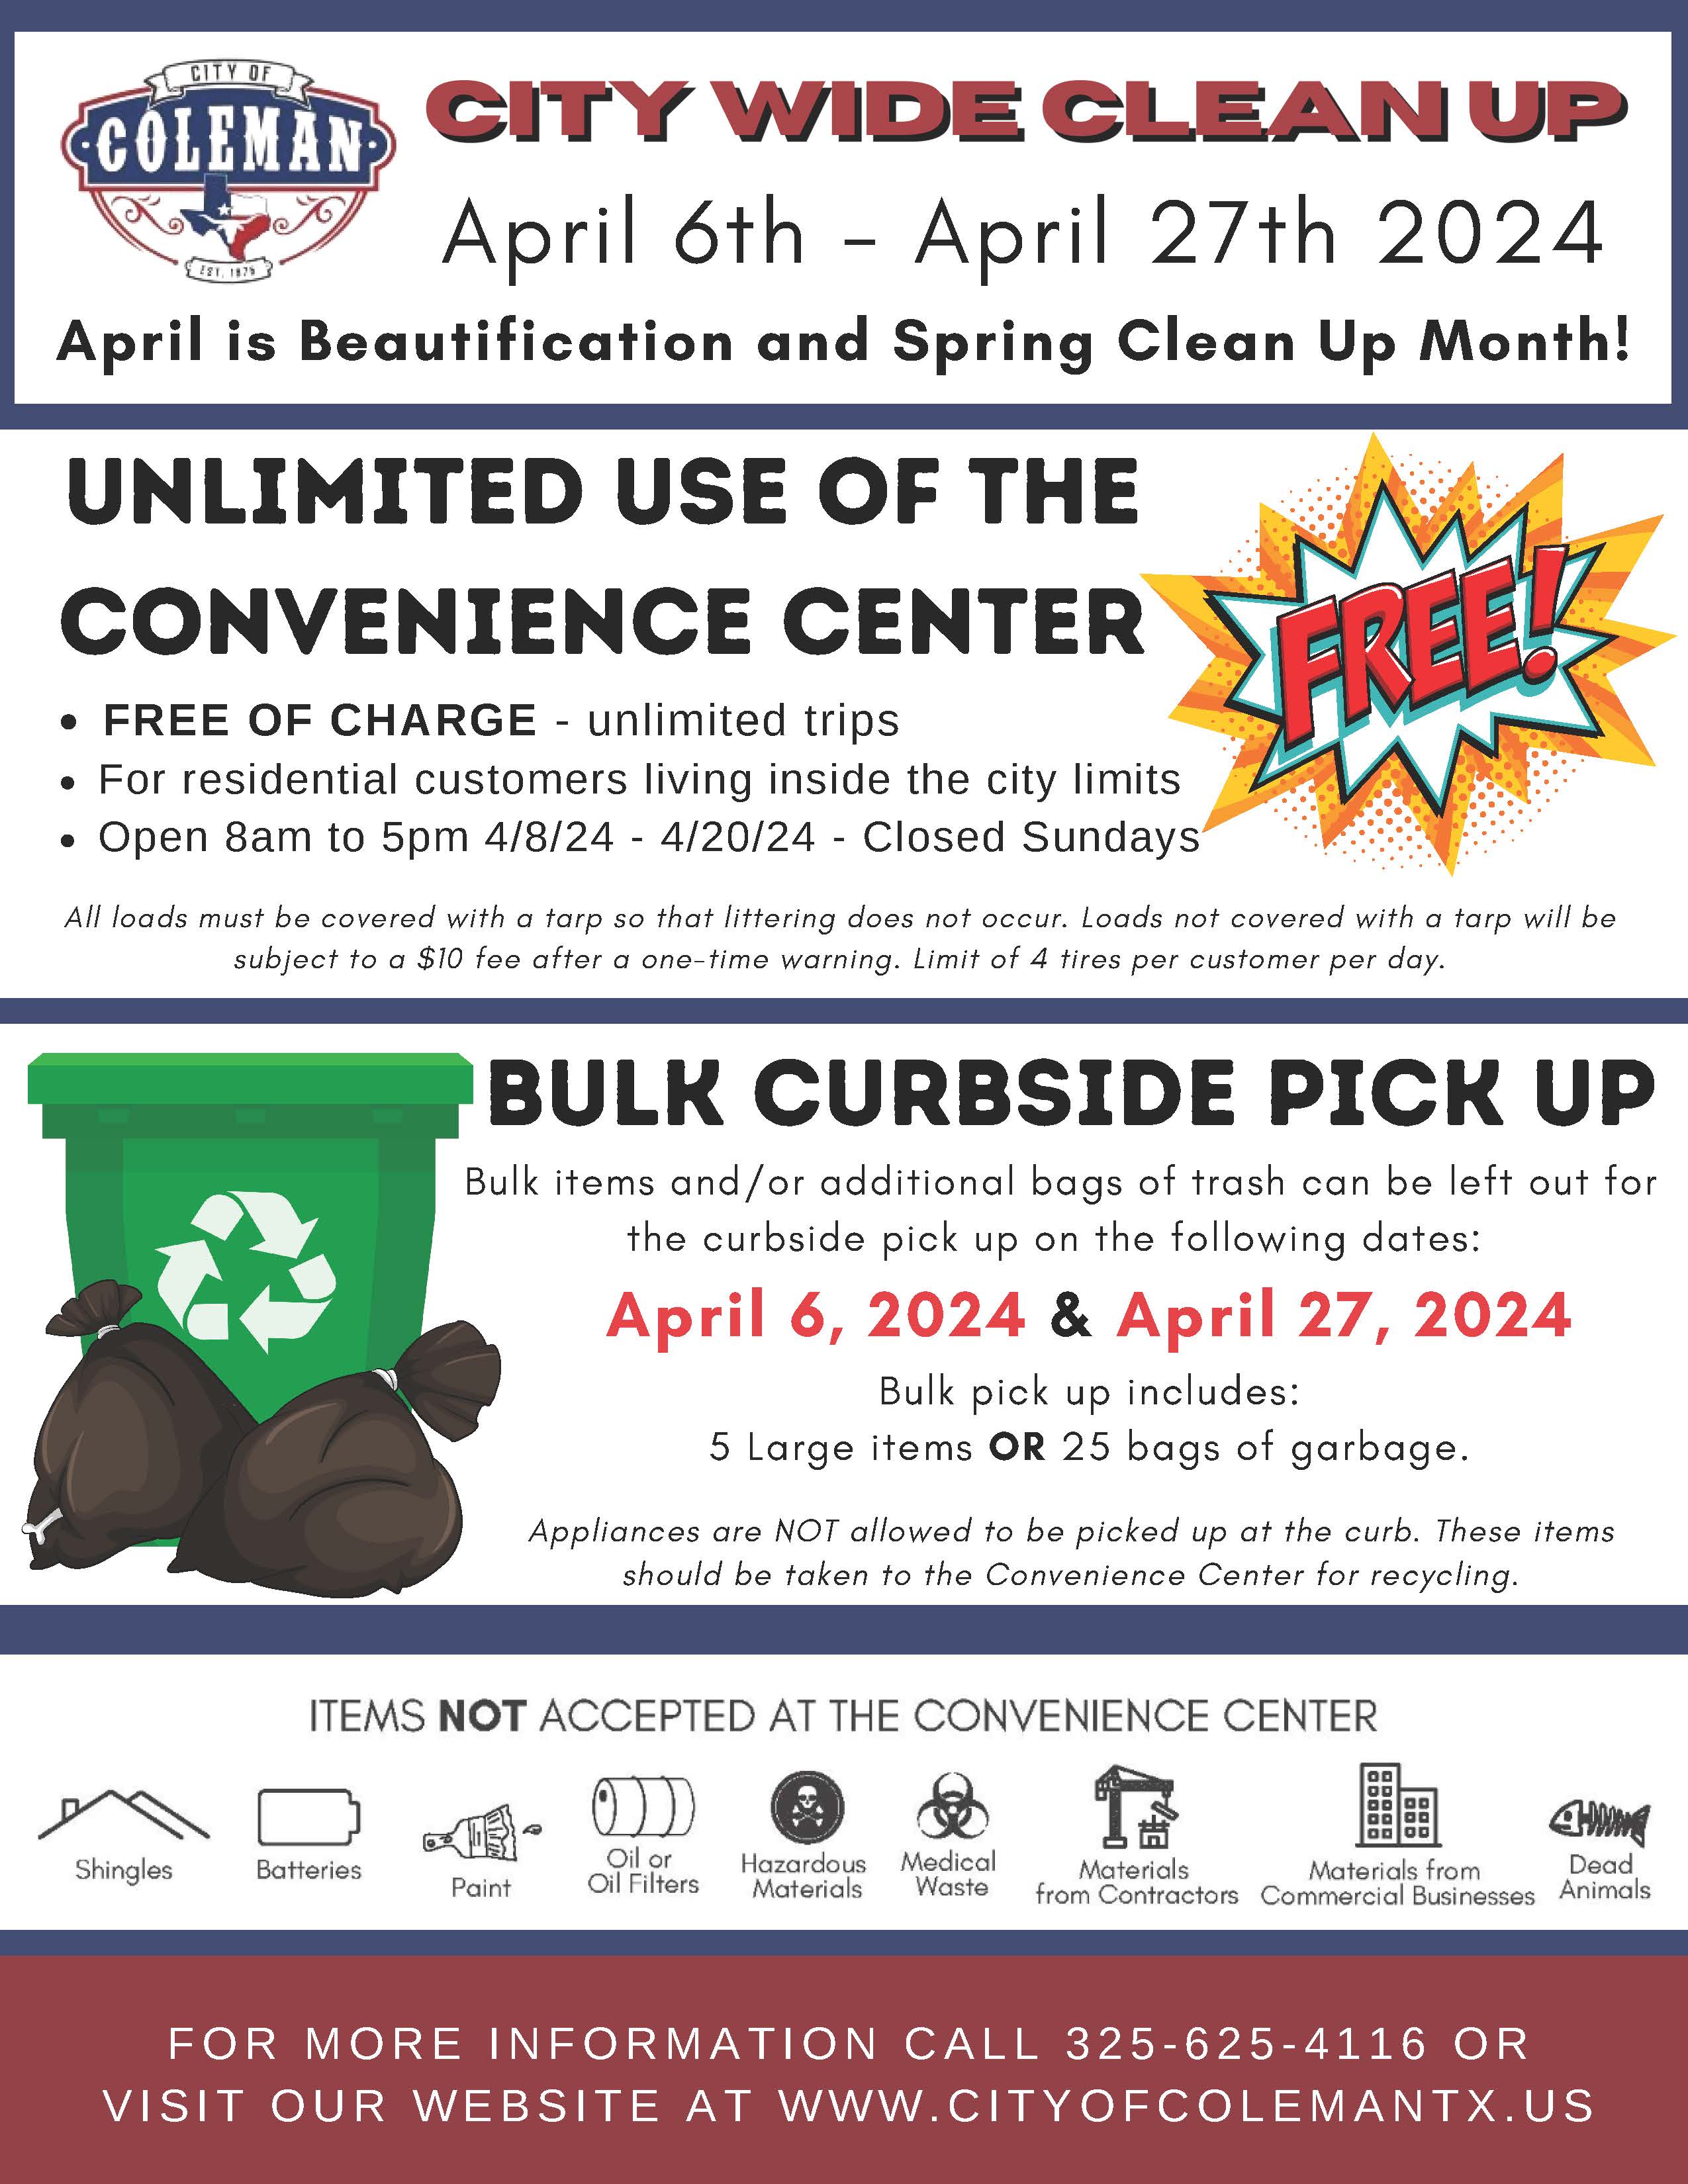 City-Wide Cleanup Flier